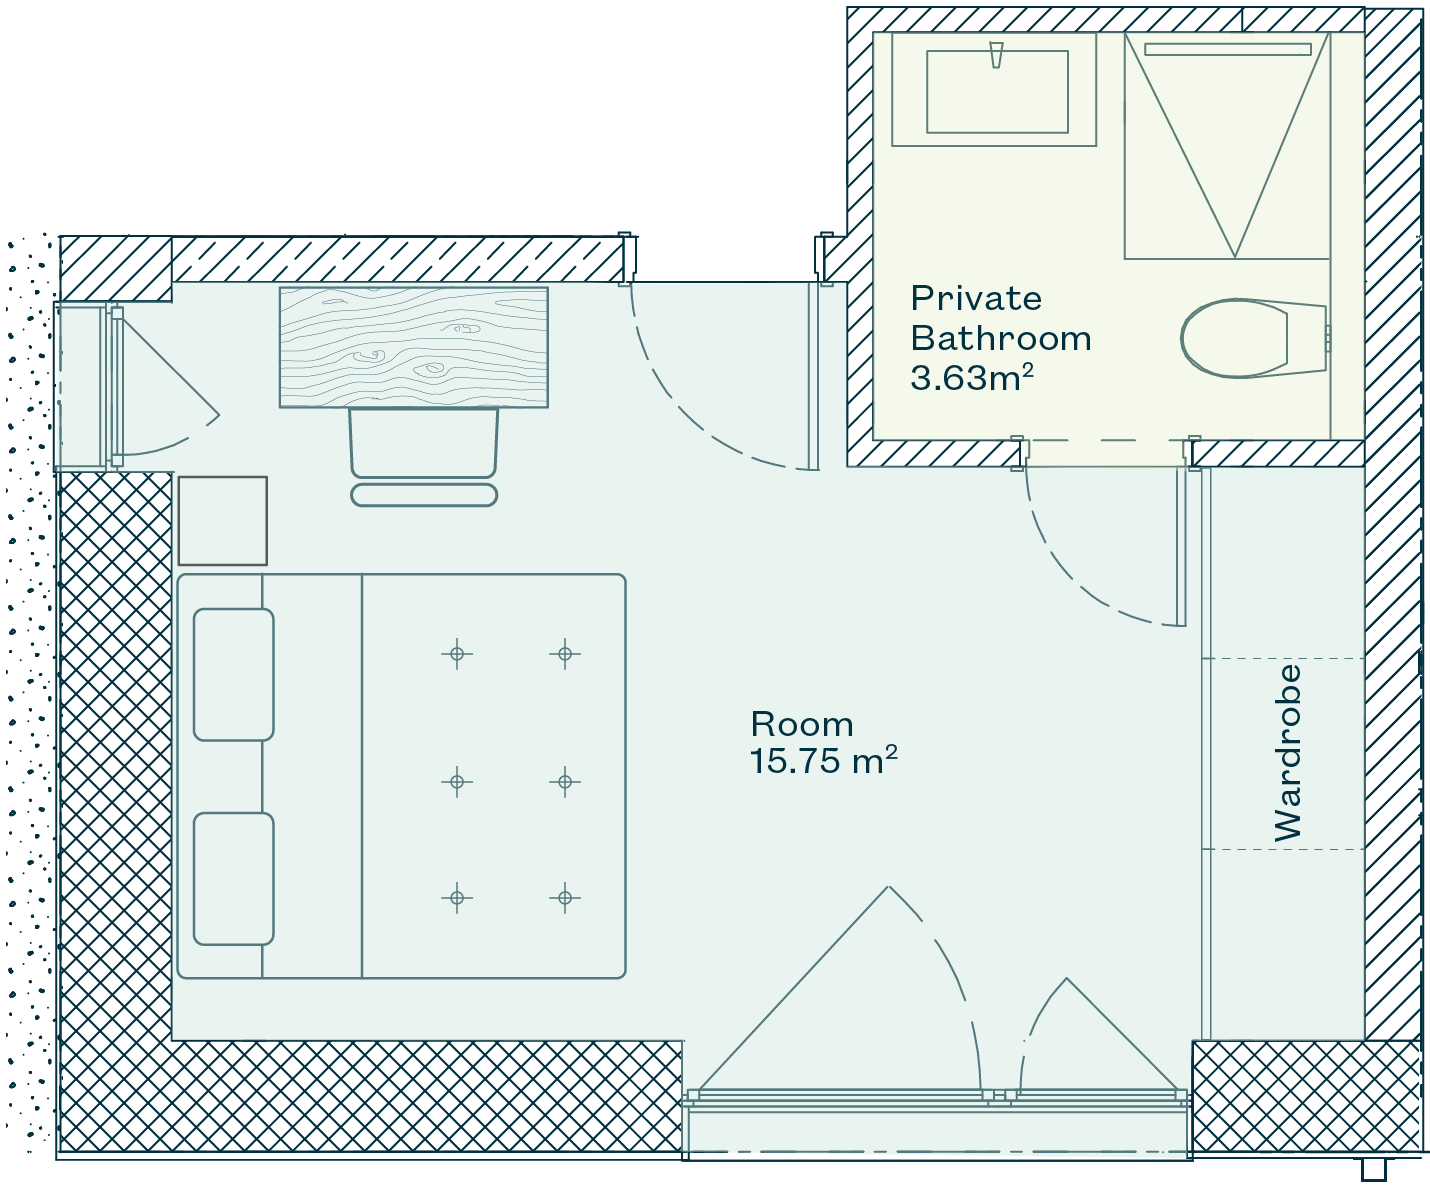 Image of the floorplan for a room with private ensuite bathroom in a shared house